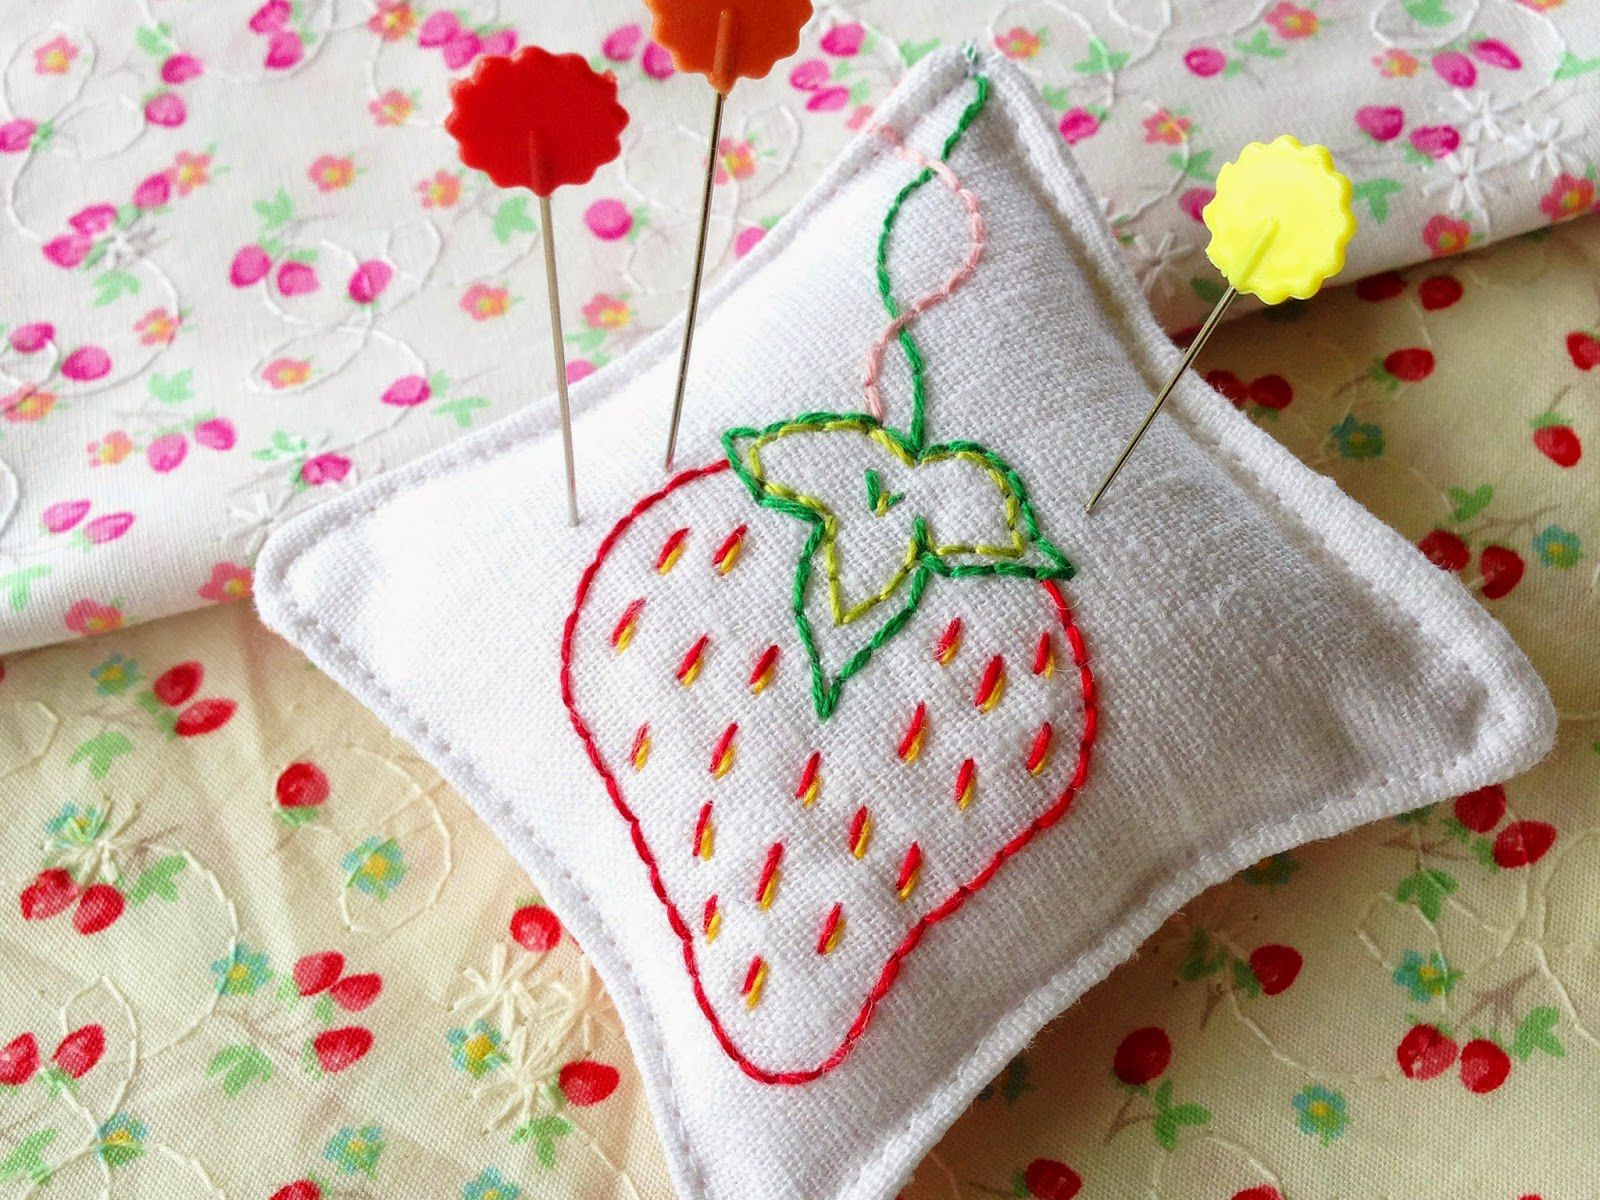 How To Make Embroidery Patterns 10 Free Embroidery Patterns For Beginners